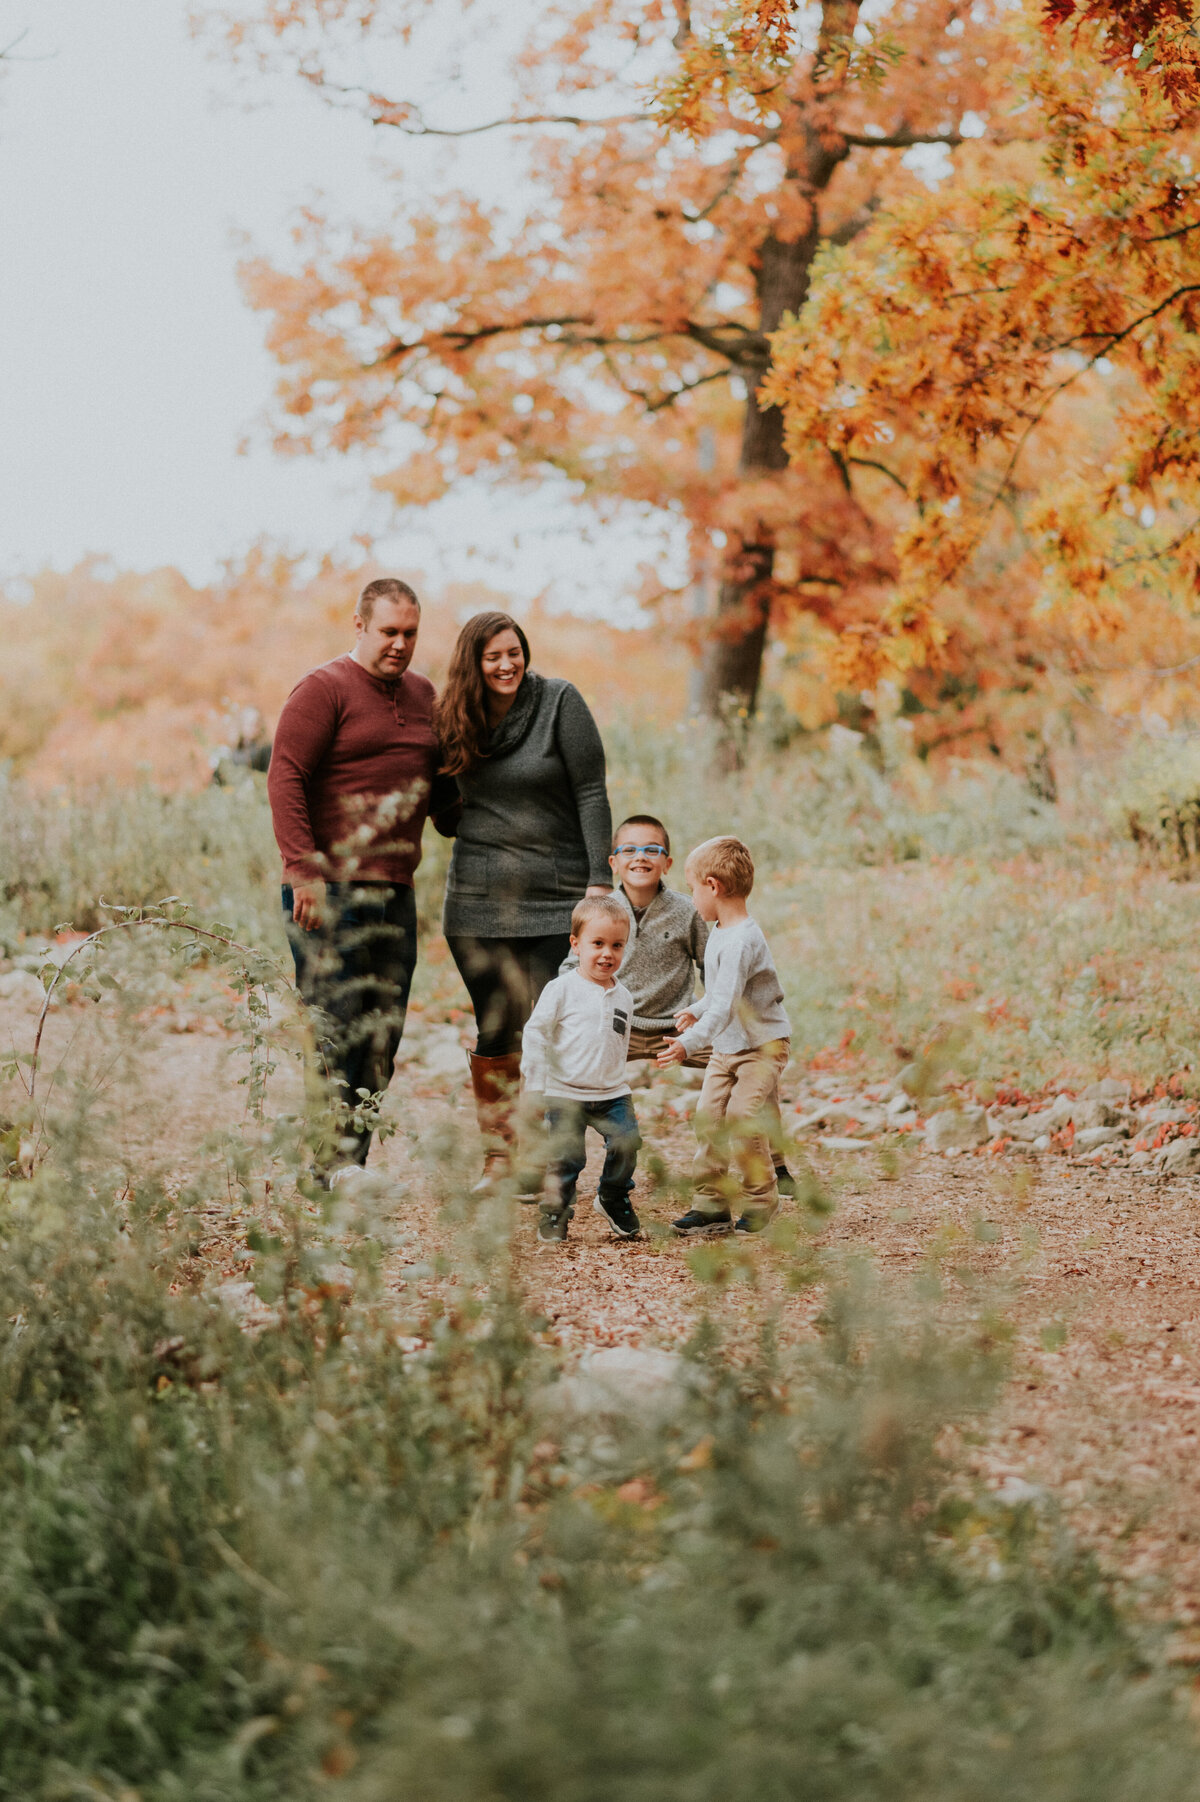 Experience the joy of family togetherness with this candid portrait captured at Silverwood Park in New Brighton, MN. Join the journey as a family of five shares a delightful stroll down a scenic path, creating timeless memories in a beautiful natural setting